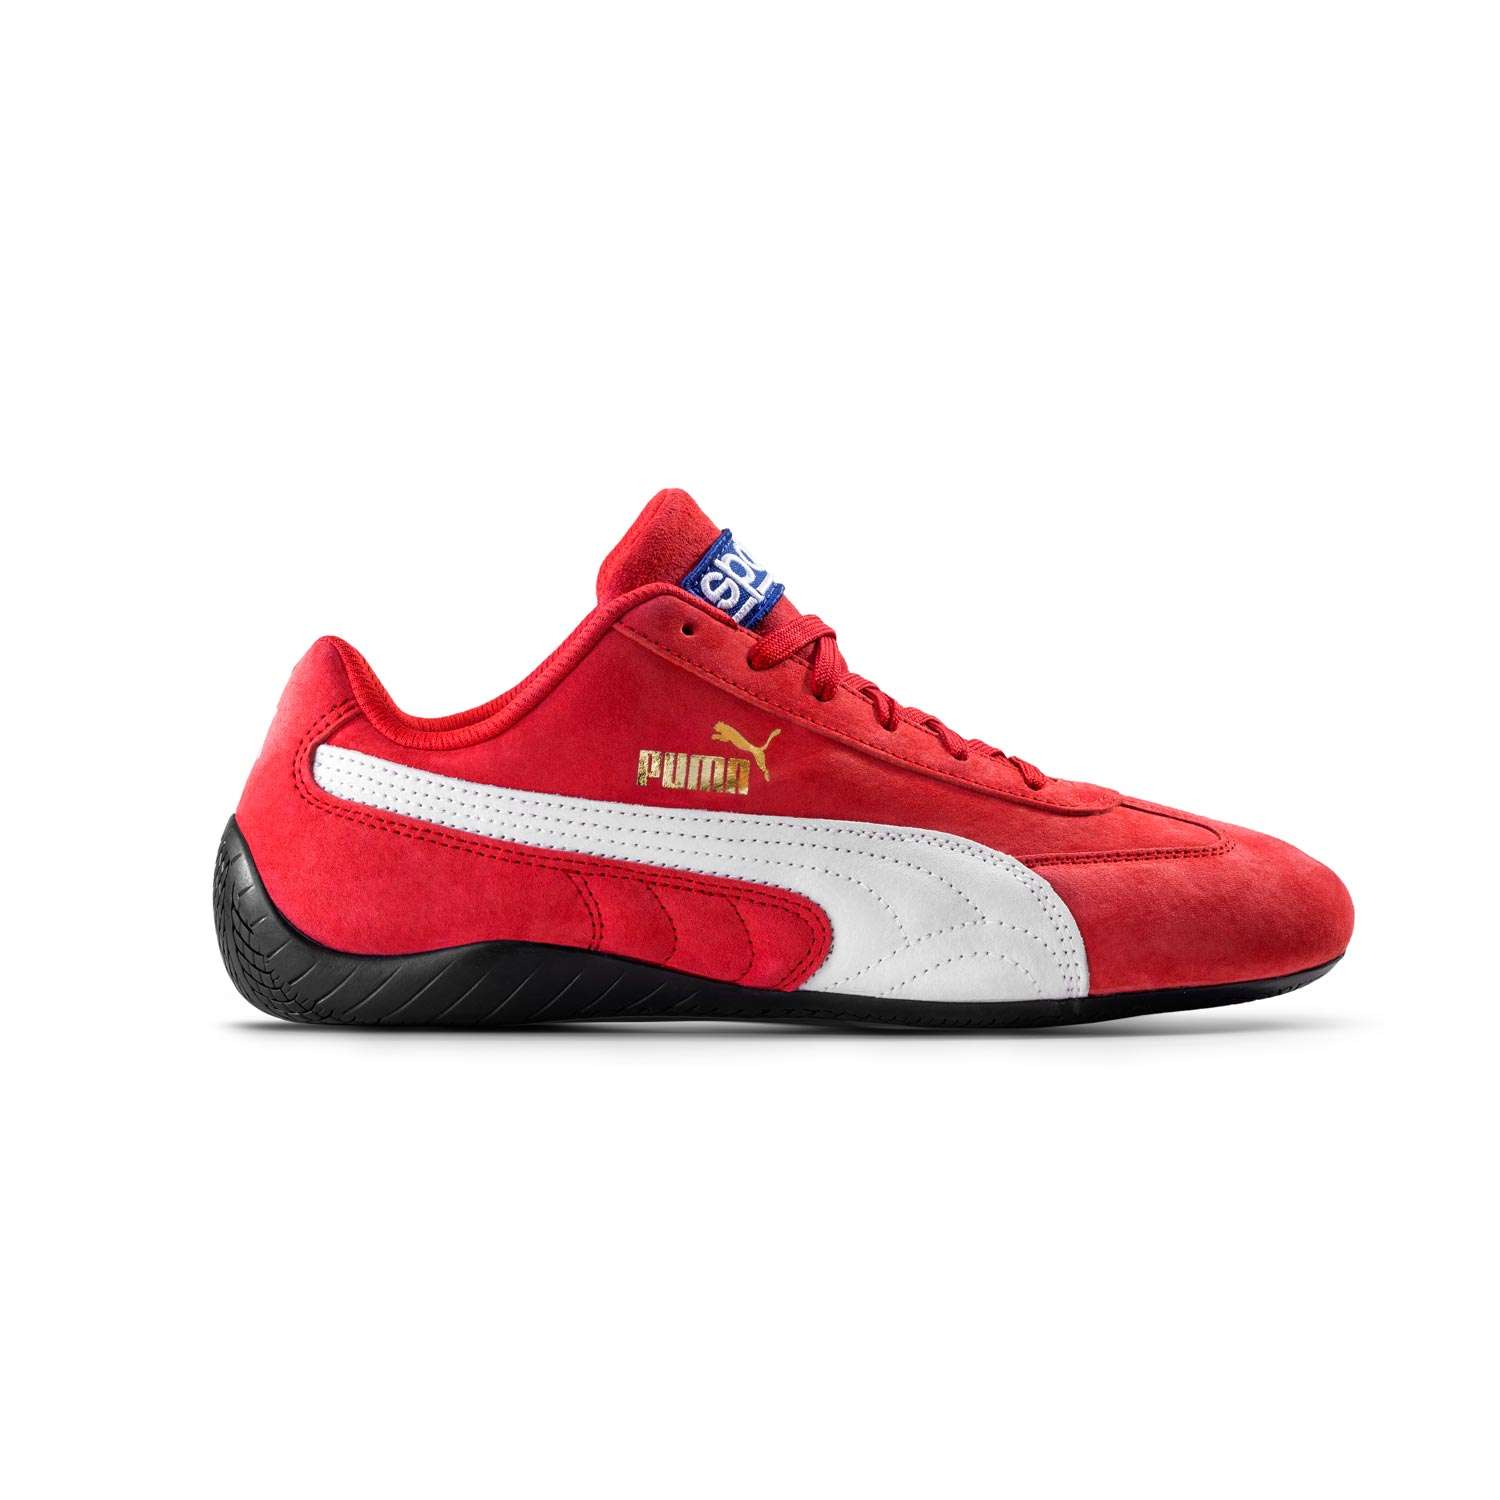 Italy PUMA Speedcat Shoes Red Red | Racewear \ Shoes Shop Team \ Motorsport Equipment \ Sparco | F1store.net